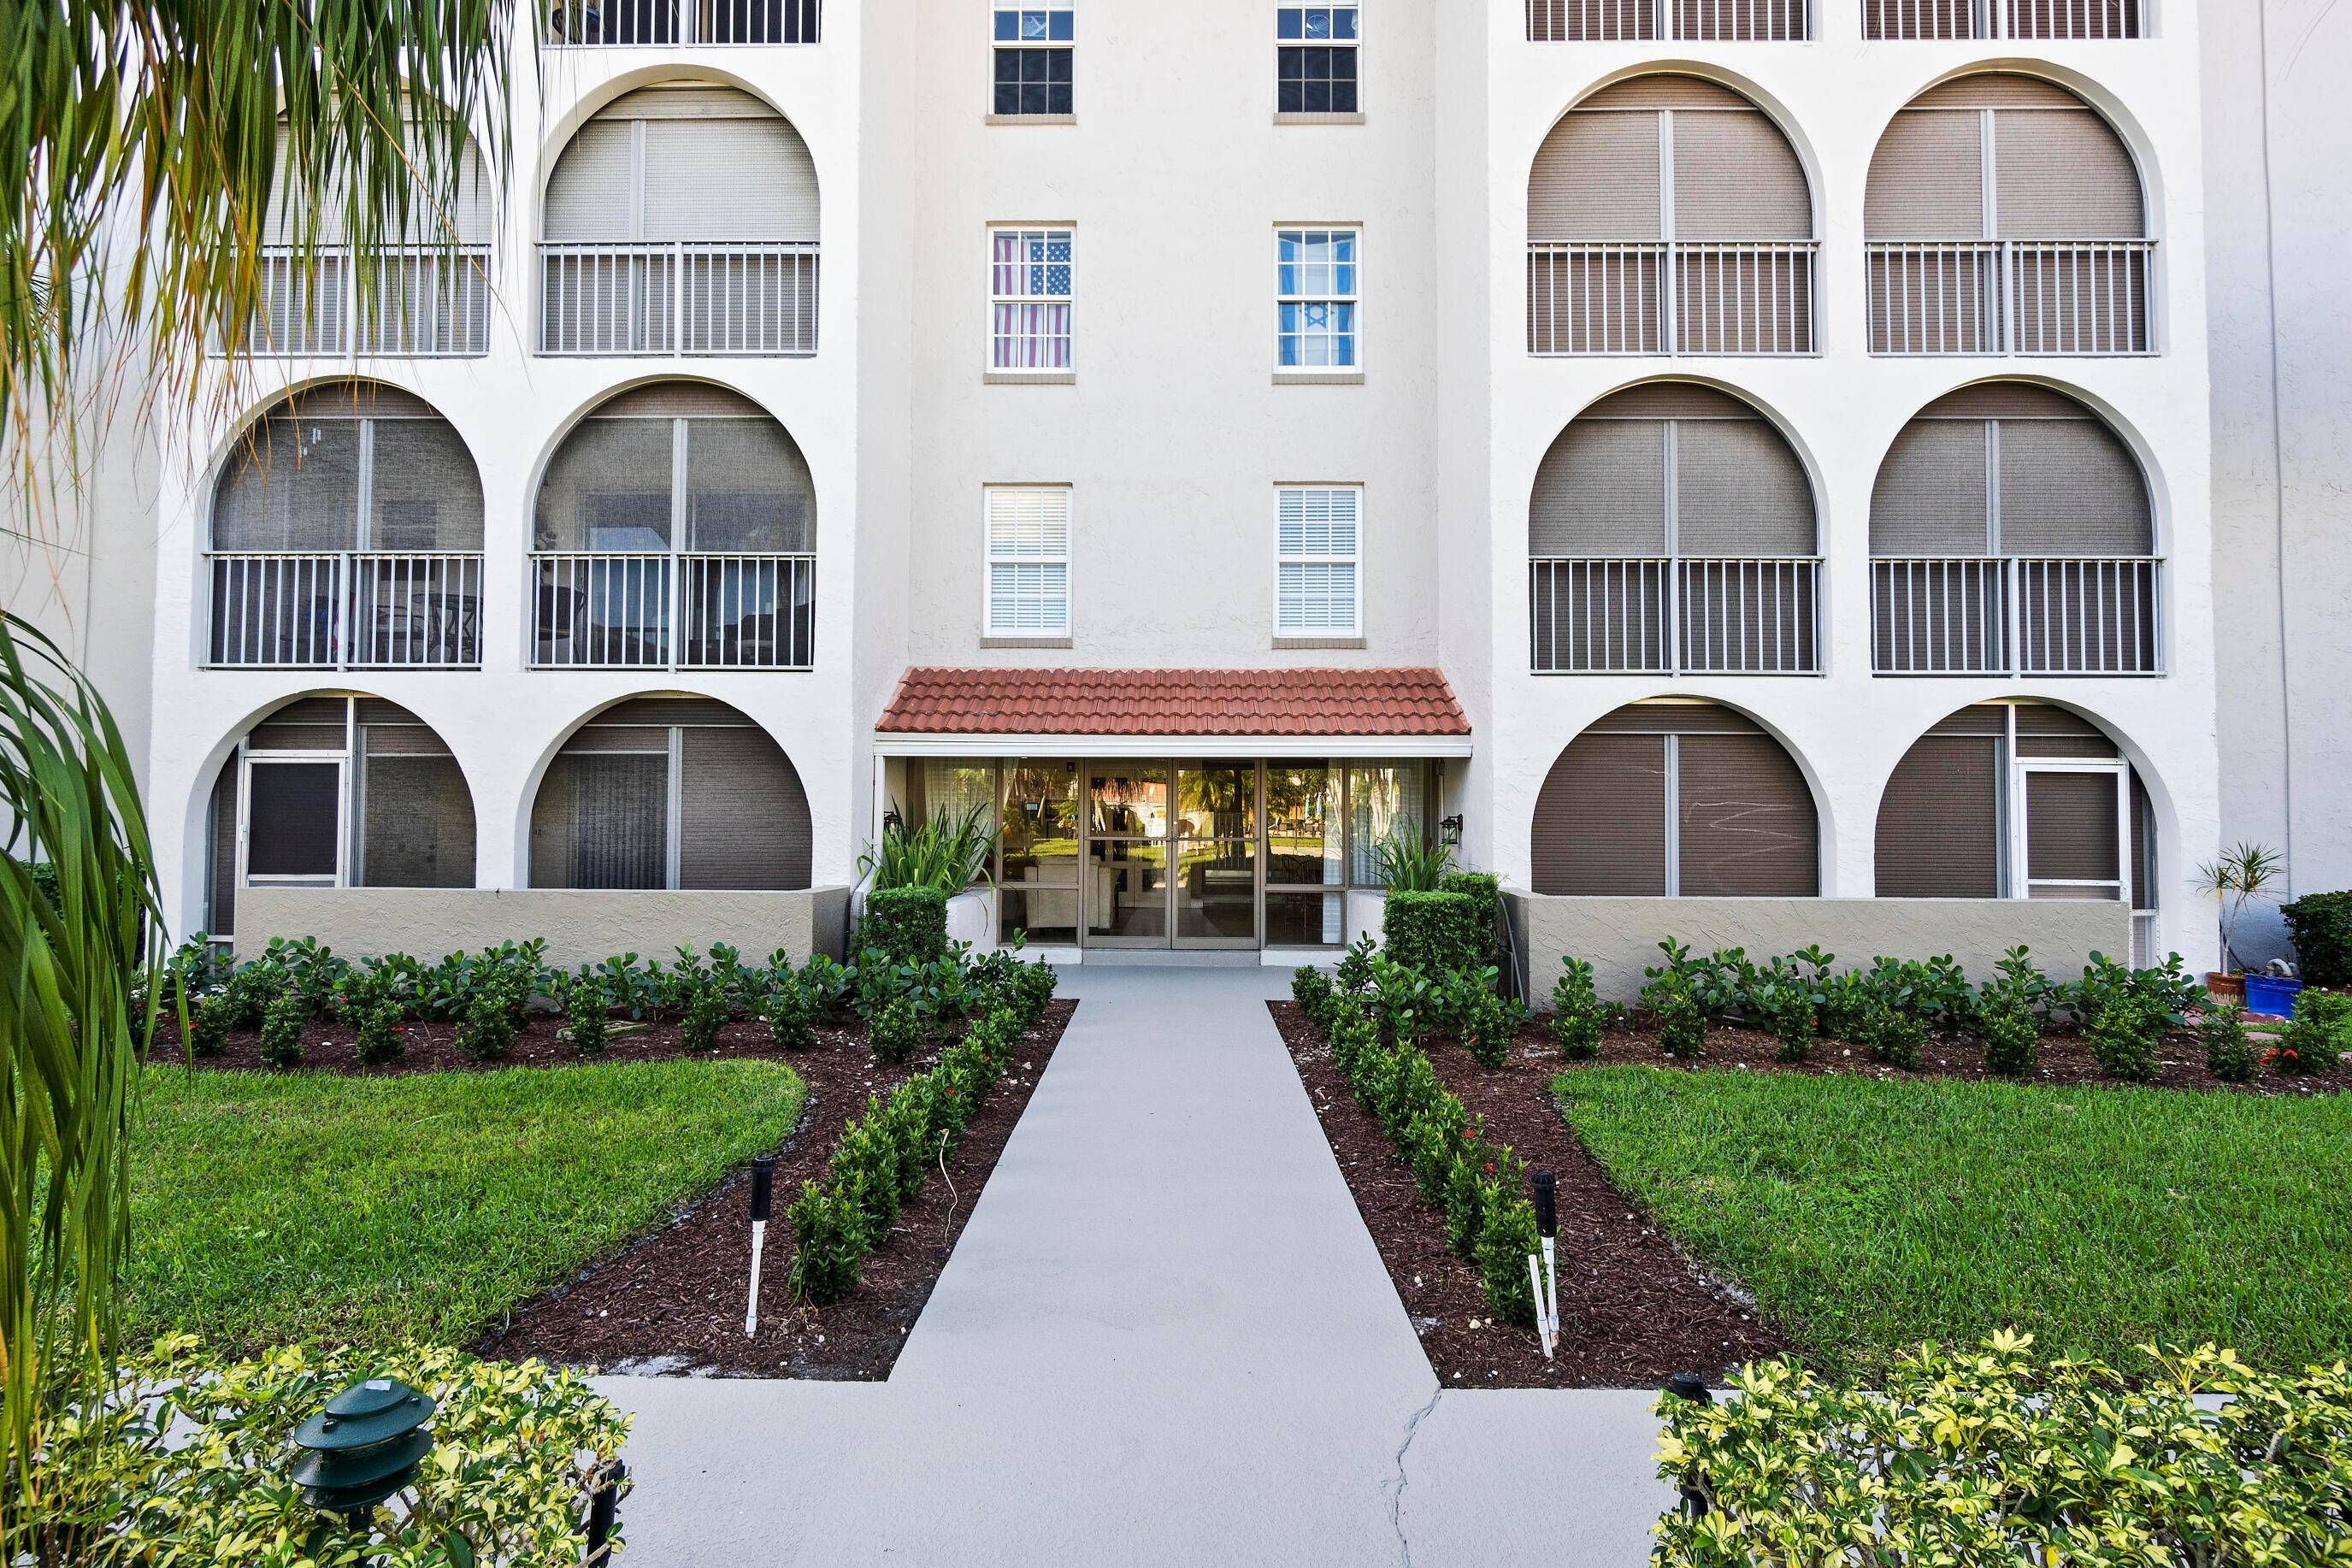 Beautifully redone East Boca 2 2 condo in 55 community, updated granite kitchen with wood soft close cabinets, stainless steel appliances, custom buffet for extra storage in dining area.